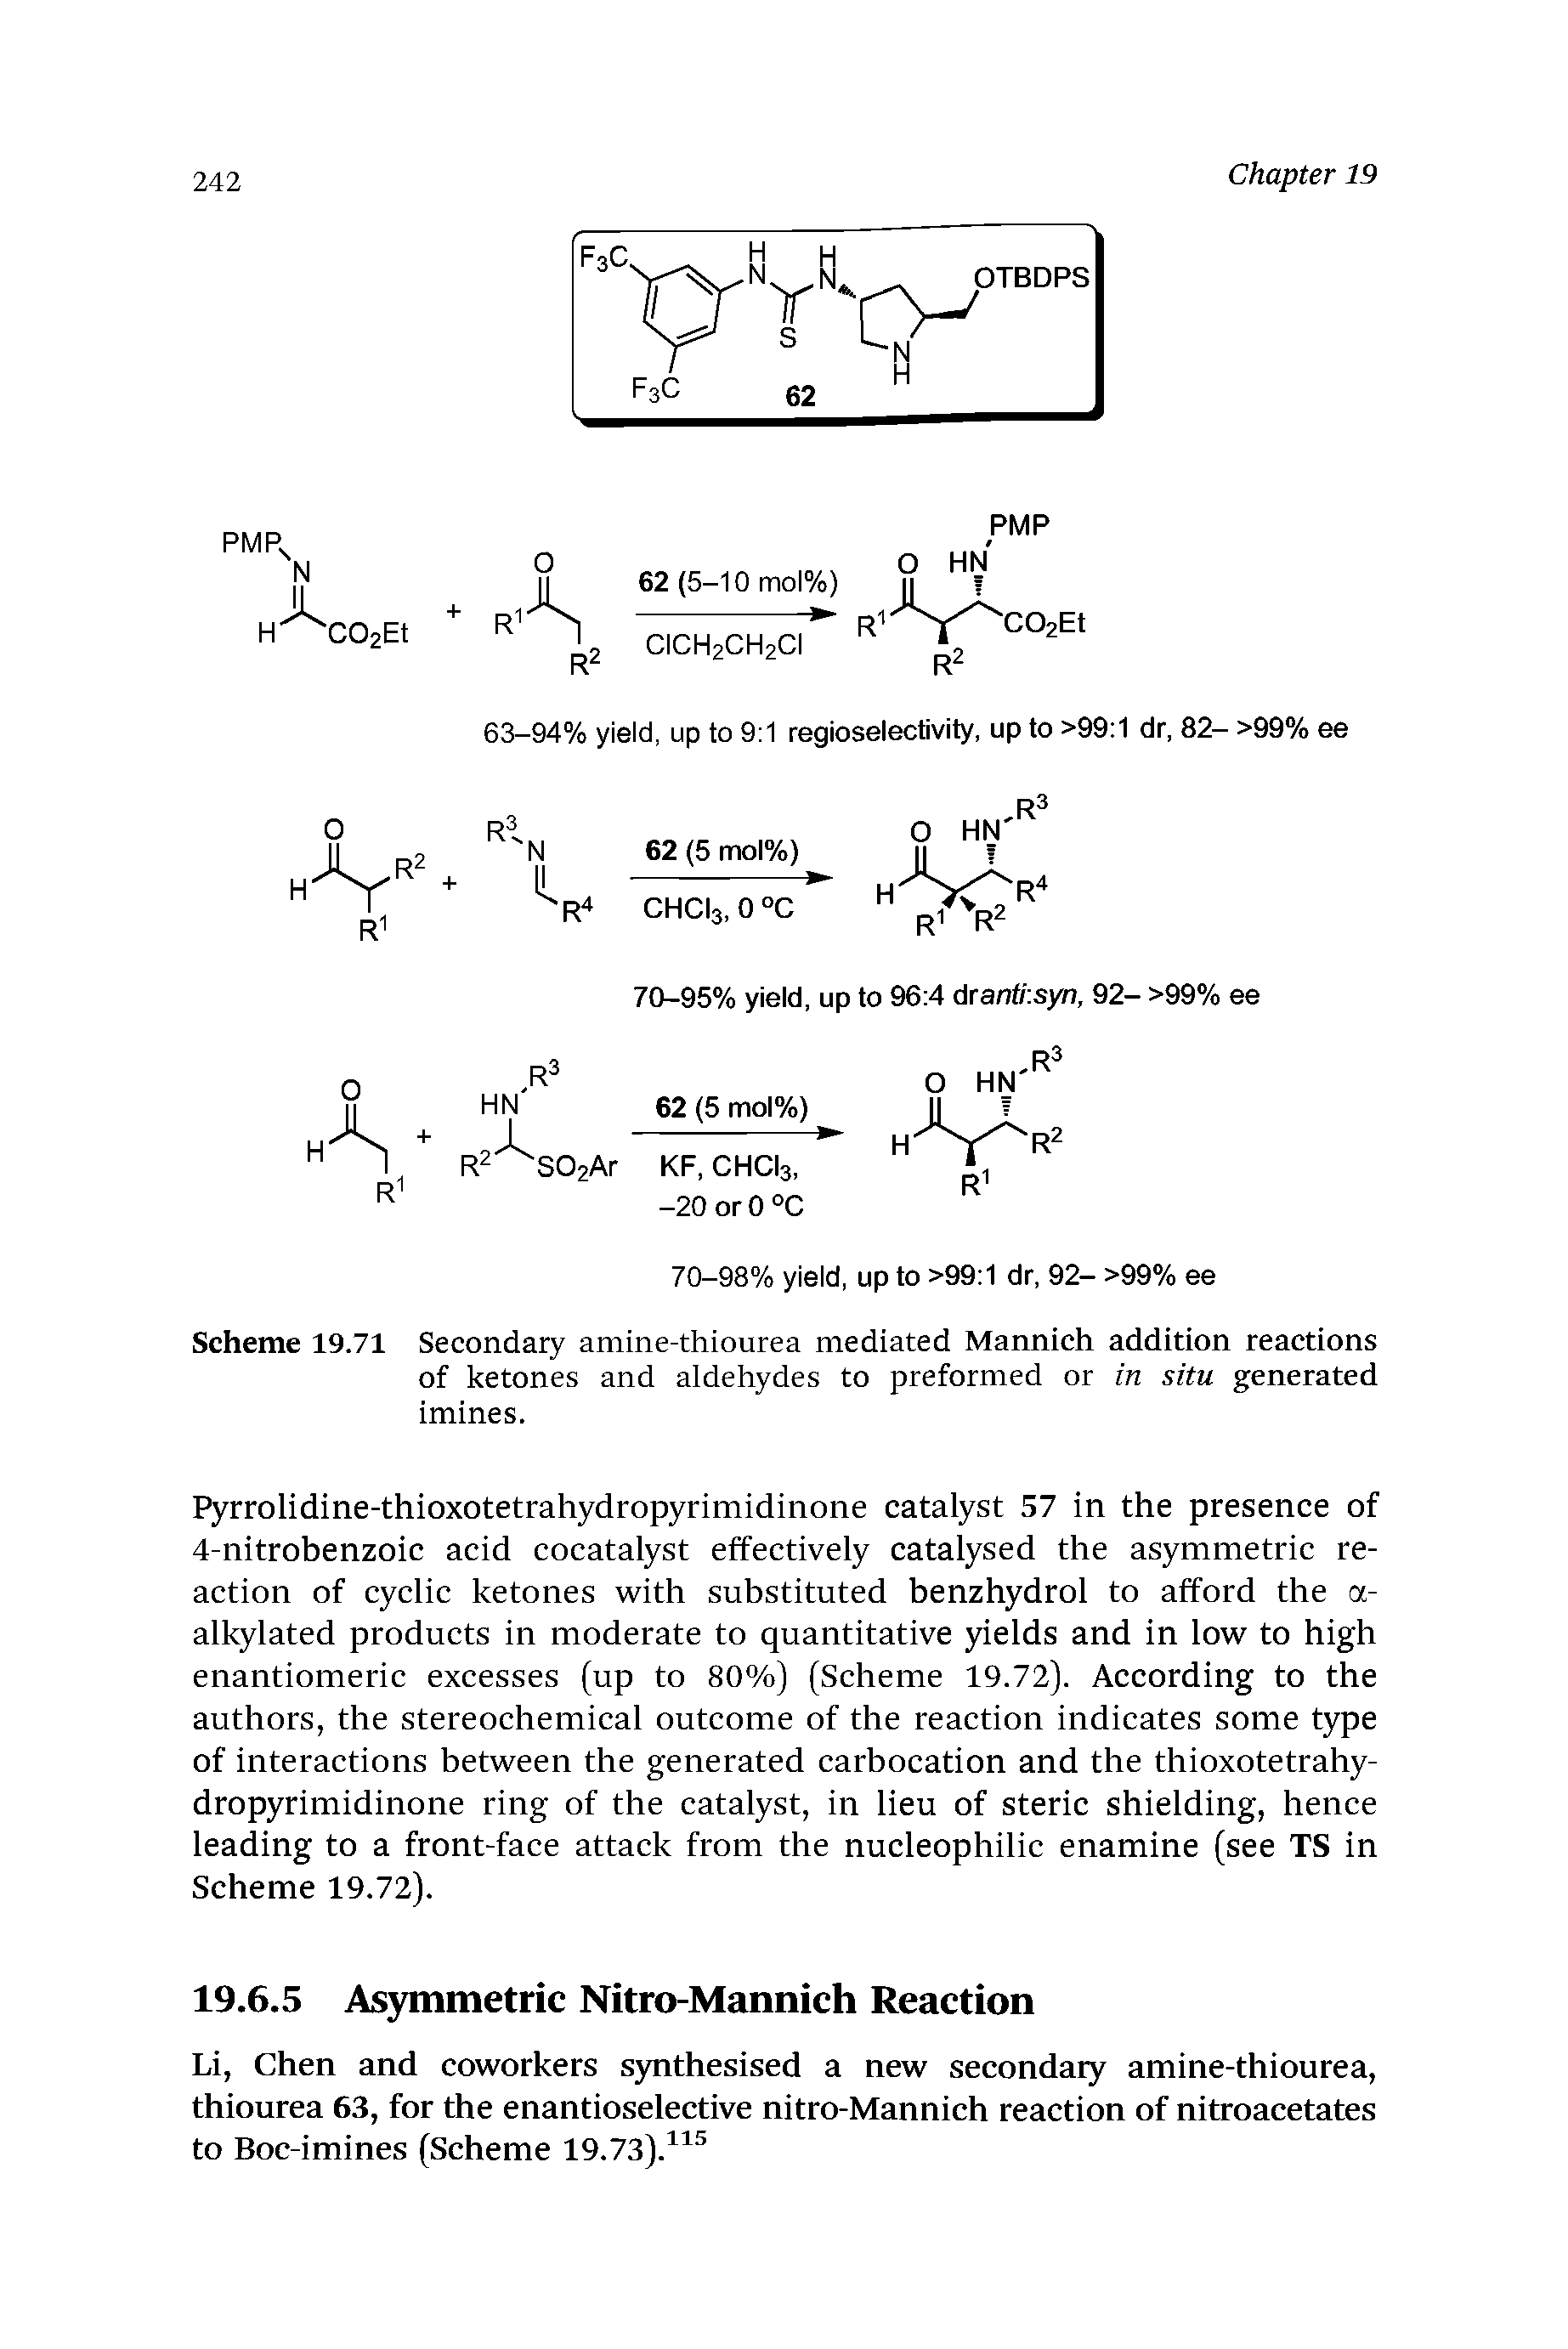 Scheme 19.71 Secondary amine-thiourea mediated Mannich addition reactions of ketones and aldehydes to preformed or in situ generated imines.